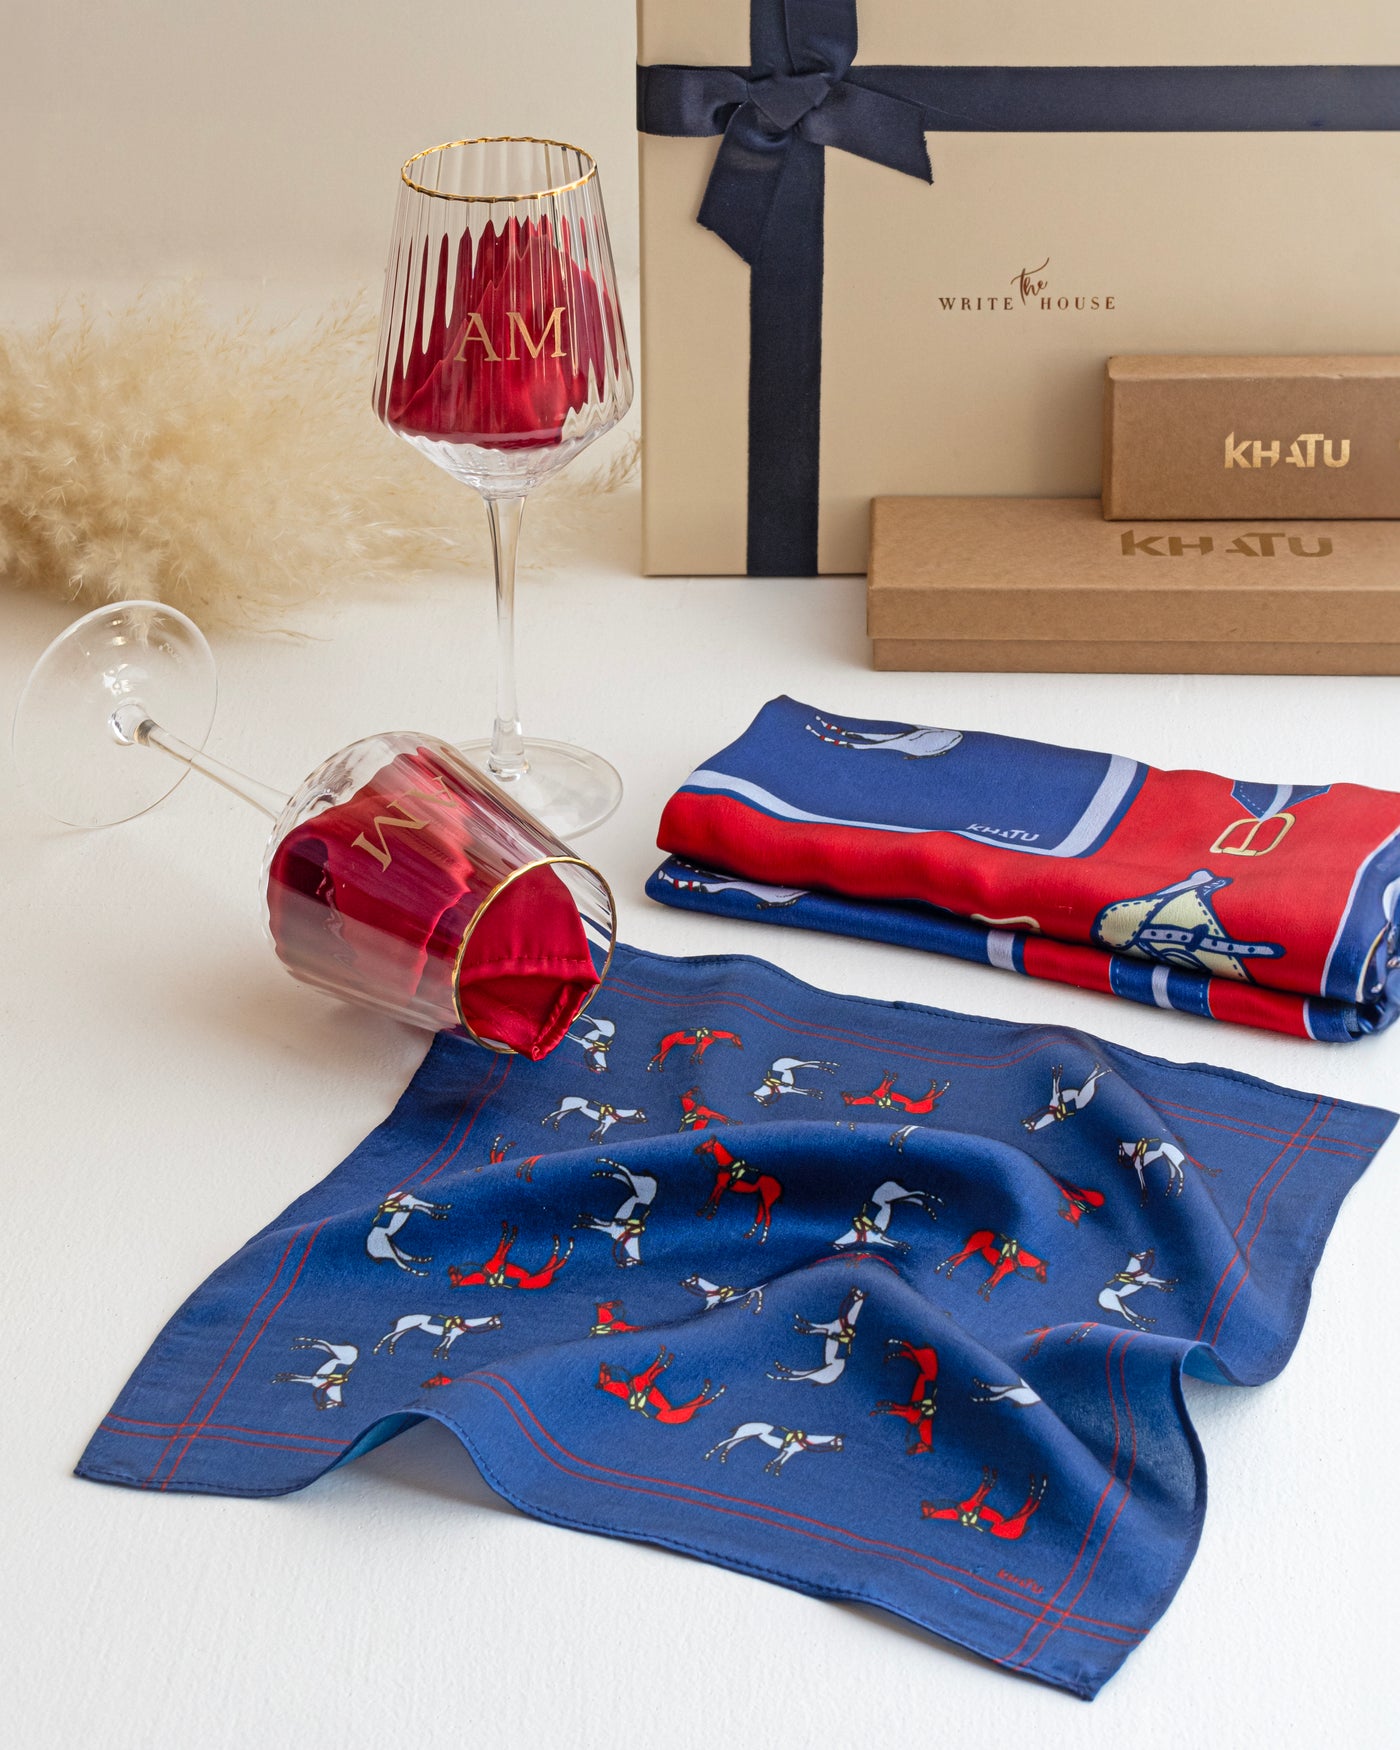 Khatu Scraf and Pocket square with TWH 2 Classis wine glass